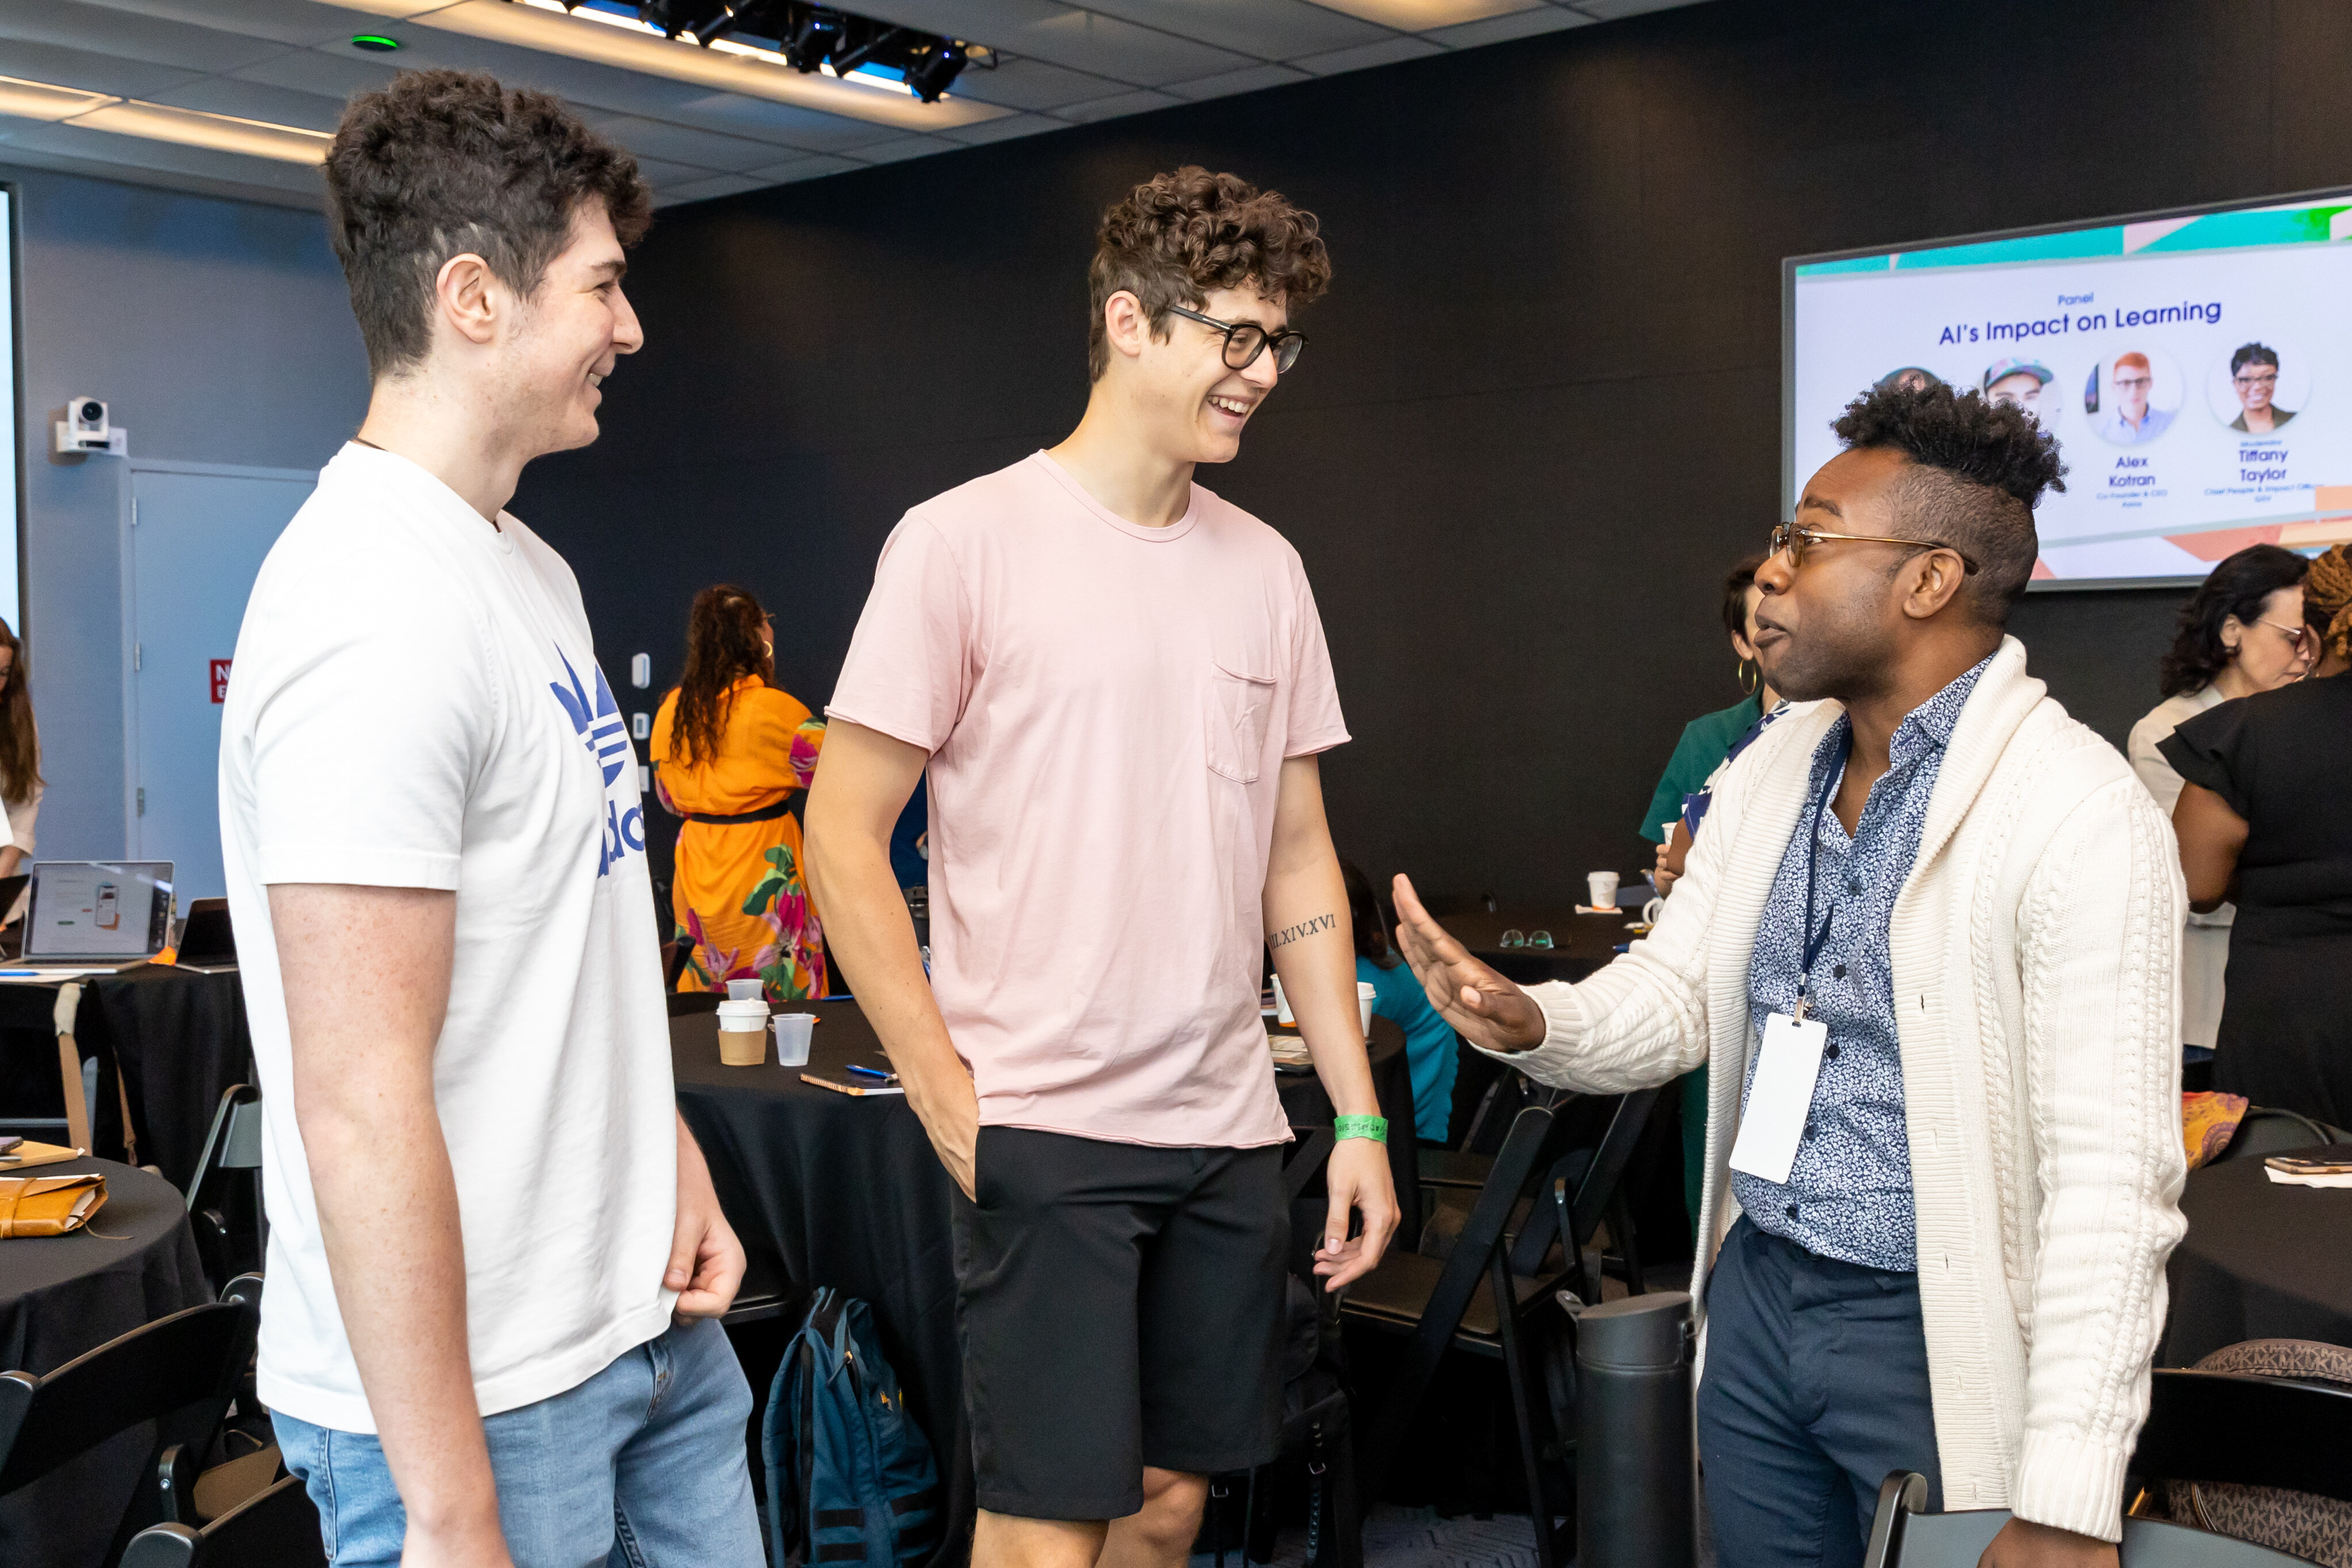 Students discussed AI’s impact on learning with education leaders at the summit.
